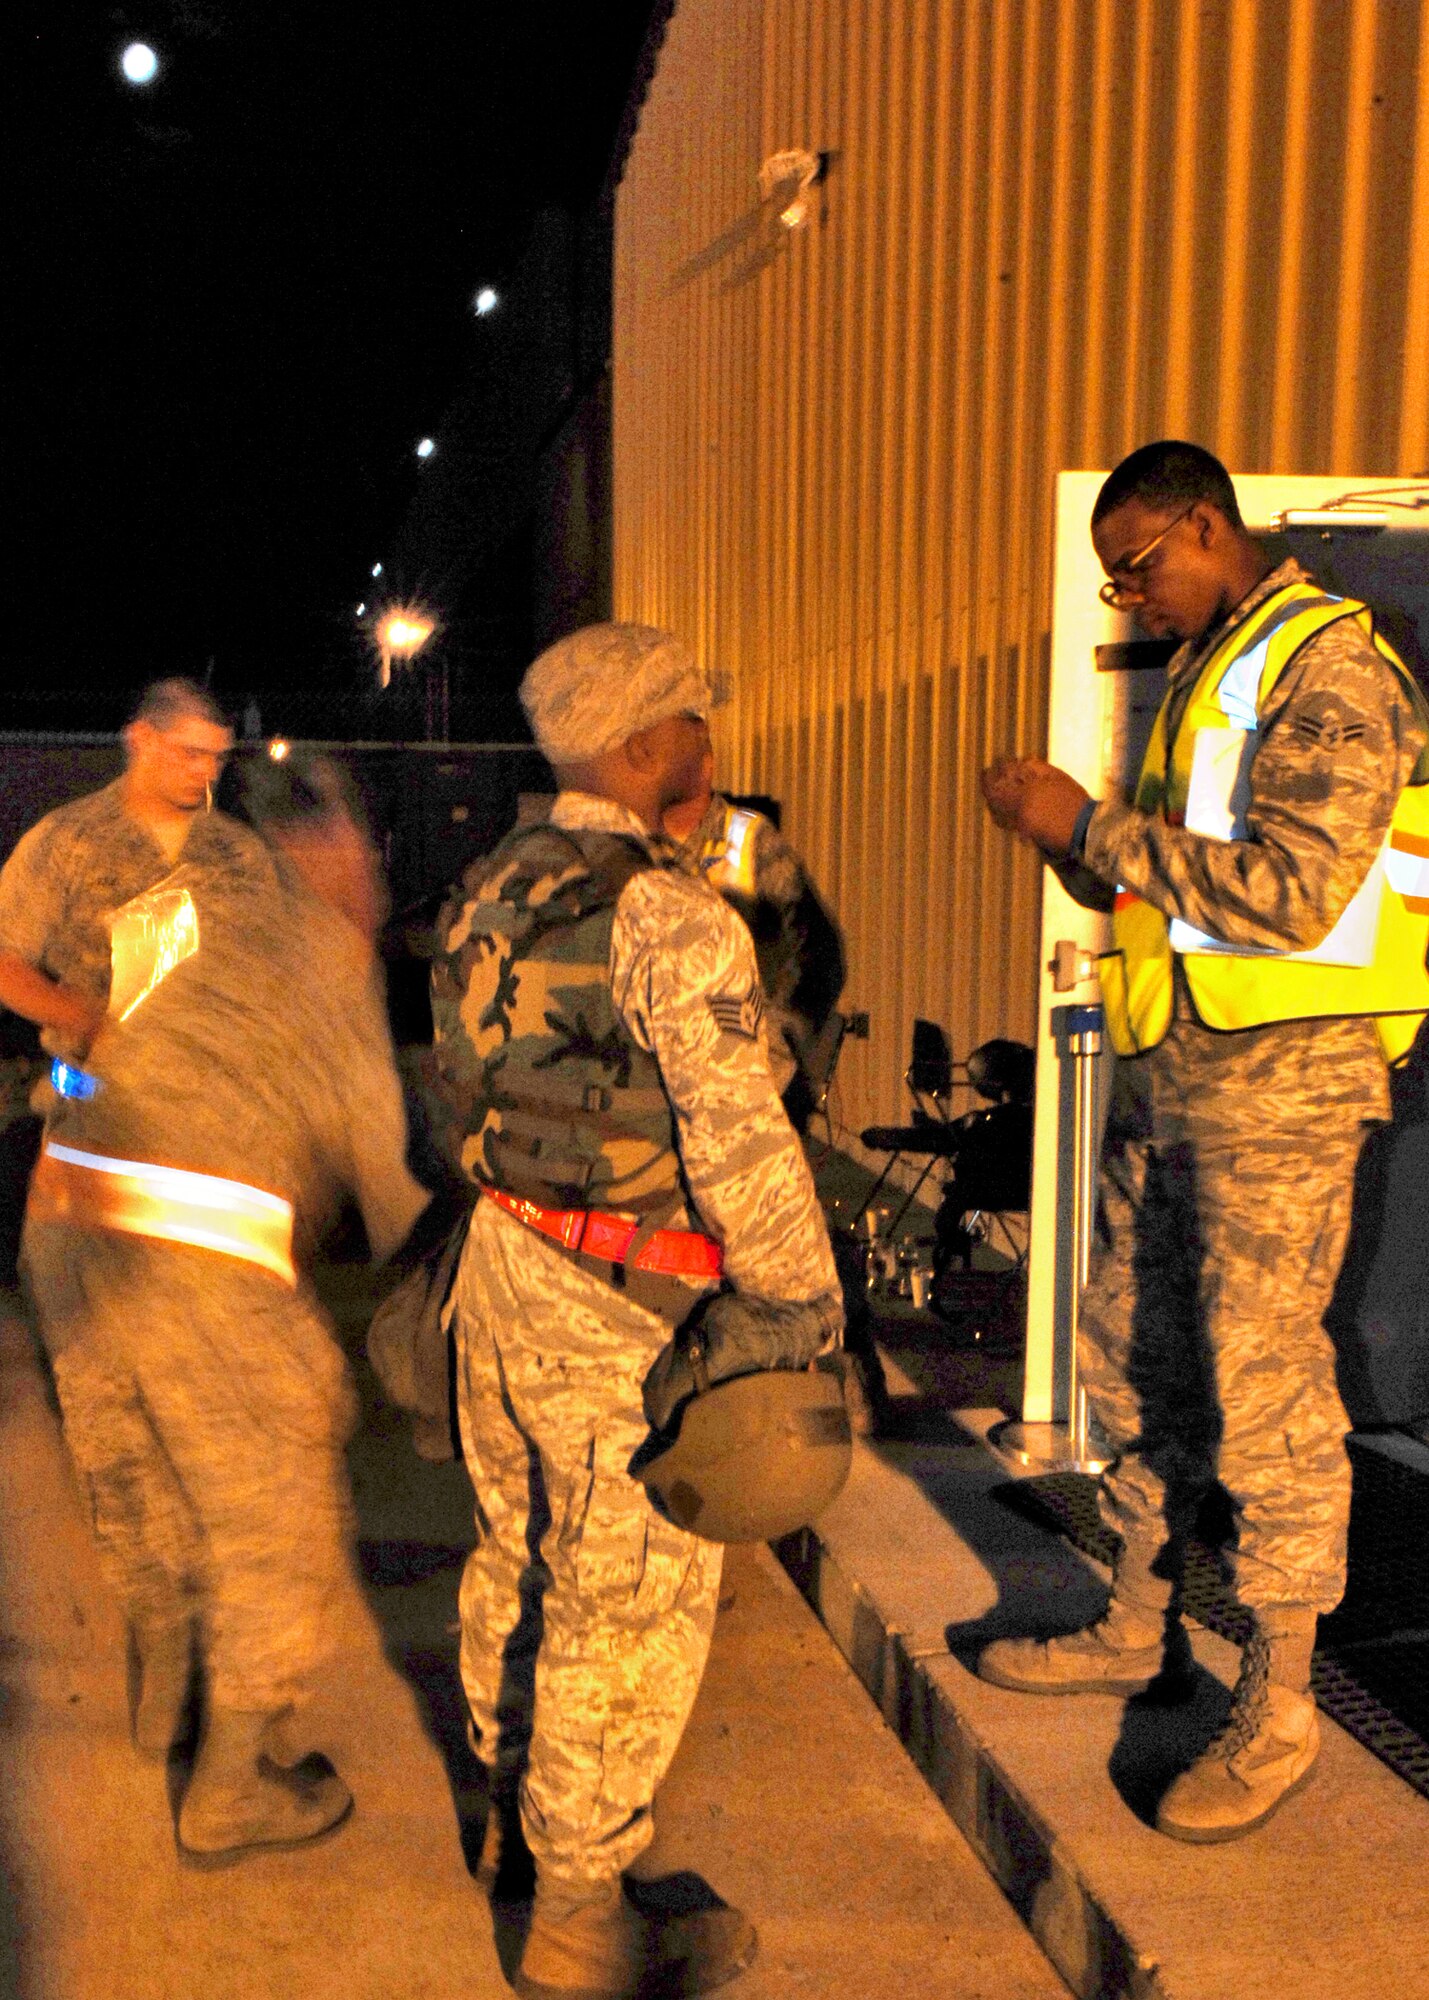 HOLLOMAN AIR FORCE BASE, N.M. -- Airman 1st Class Muhammed Ahmed, 49th Force Support Squadron, checks Staff Sgt. Roland Vinge's, 49th Material Maintenance Support Squadron, military identification card before giving him access to enter the Personnel Deployment Facility during Exercise Cornet Gold Rush at Basic Expeditionary Airfield Resources Base here, Oct. 6. Airman Ahmed is a customer support apprentice participating in an exercise scenario consisting of processing Airmen for deployment.  (U.S. Air Force photo by Staff Sgt. Anthony Nelson Jr)